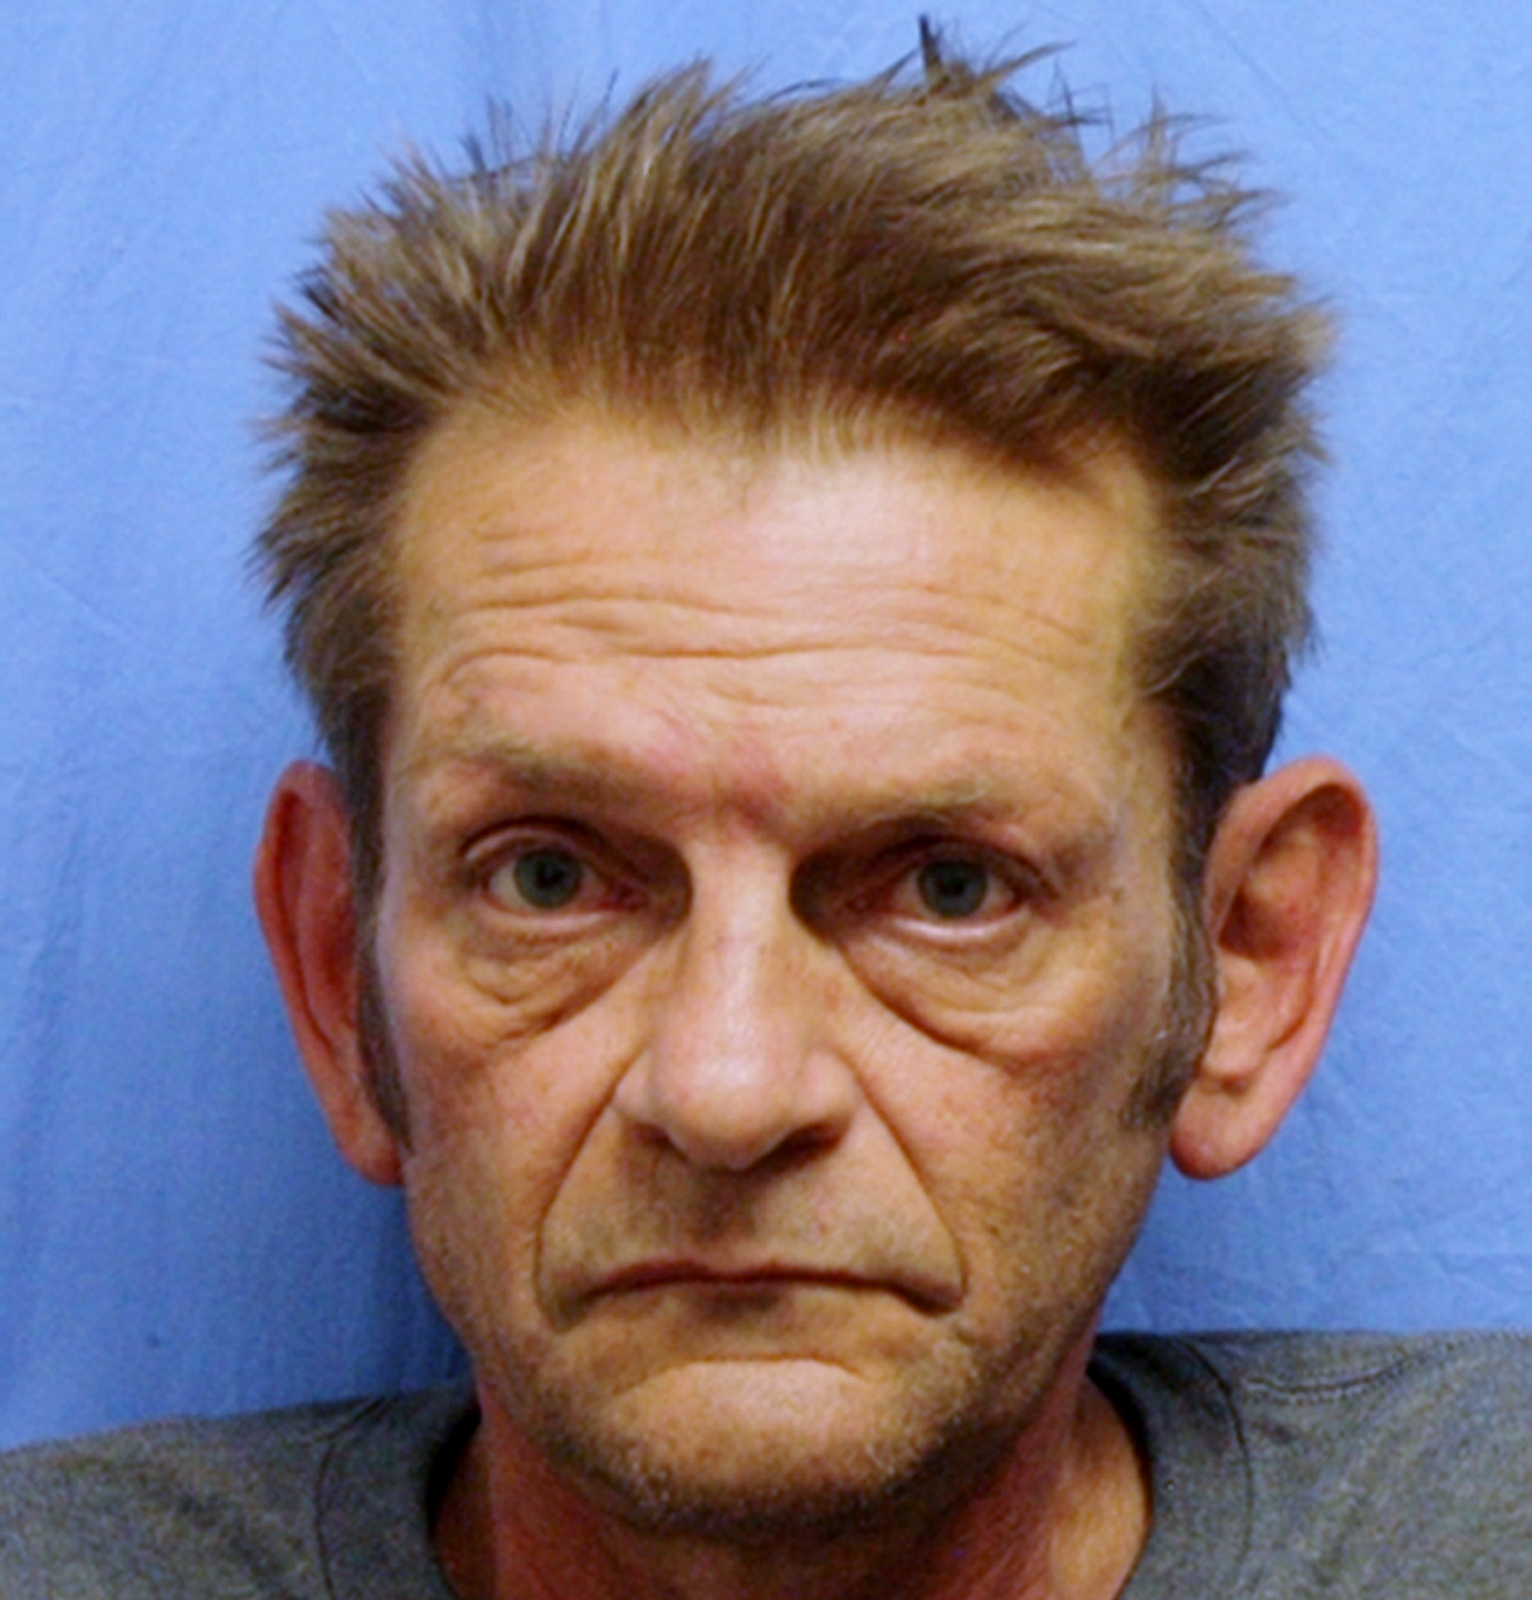 Adam Purinton, of Olathe, Kan. was arrested early Thursday, Feb. 23, 2017, in connection with a shooting at a bar in Olathe that left one person dead and and wounding two others. (Henry County (Mo.) Sheriff's Office via AP)